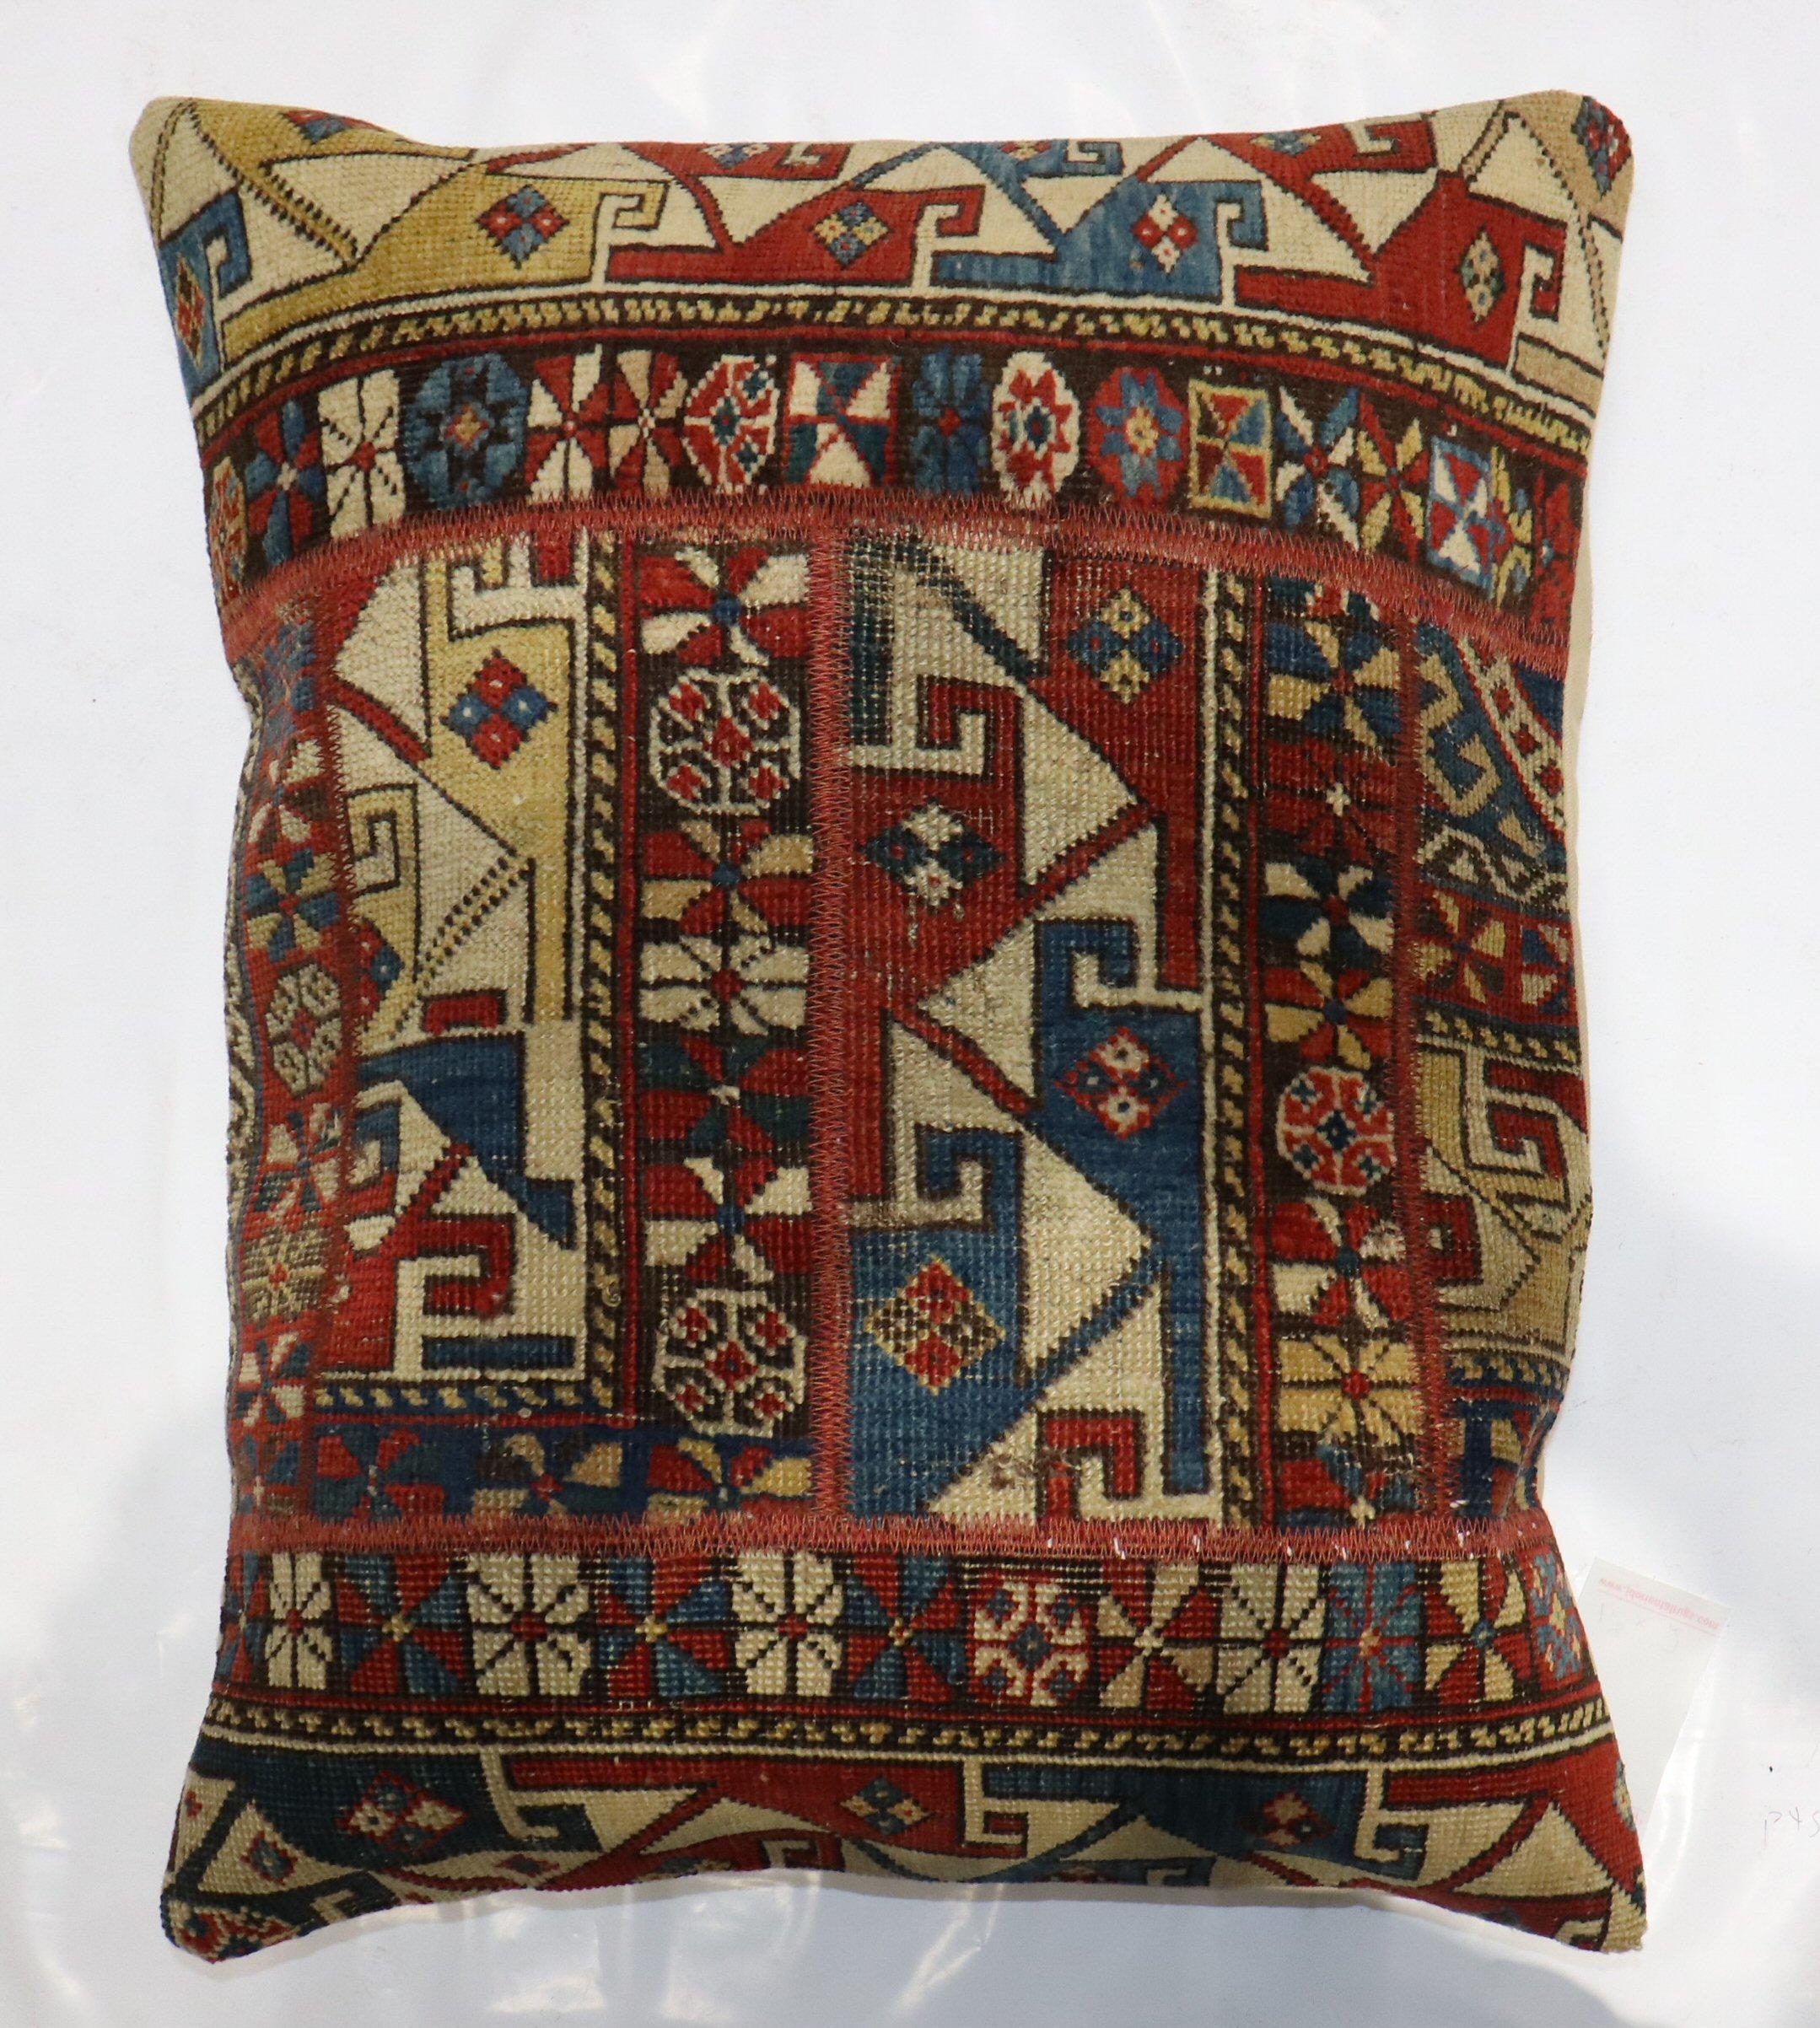 Pillow made from a 19th-century Caucasian rug  with cotton back and zipper closure included.

Measures: 20'' x 24''.